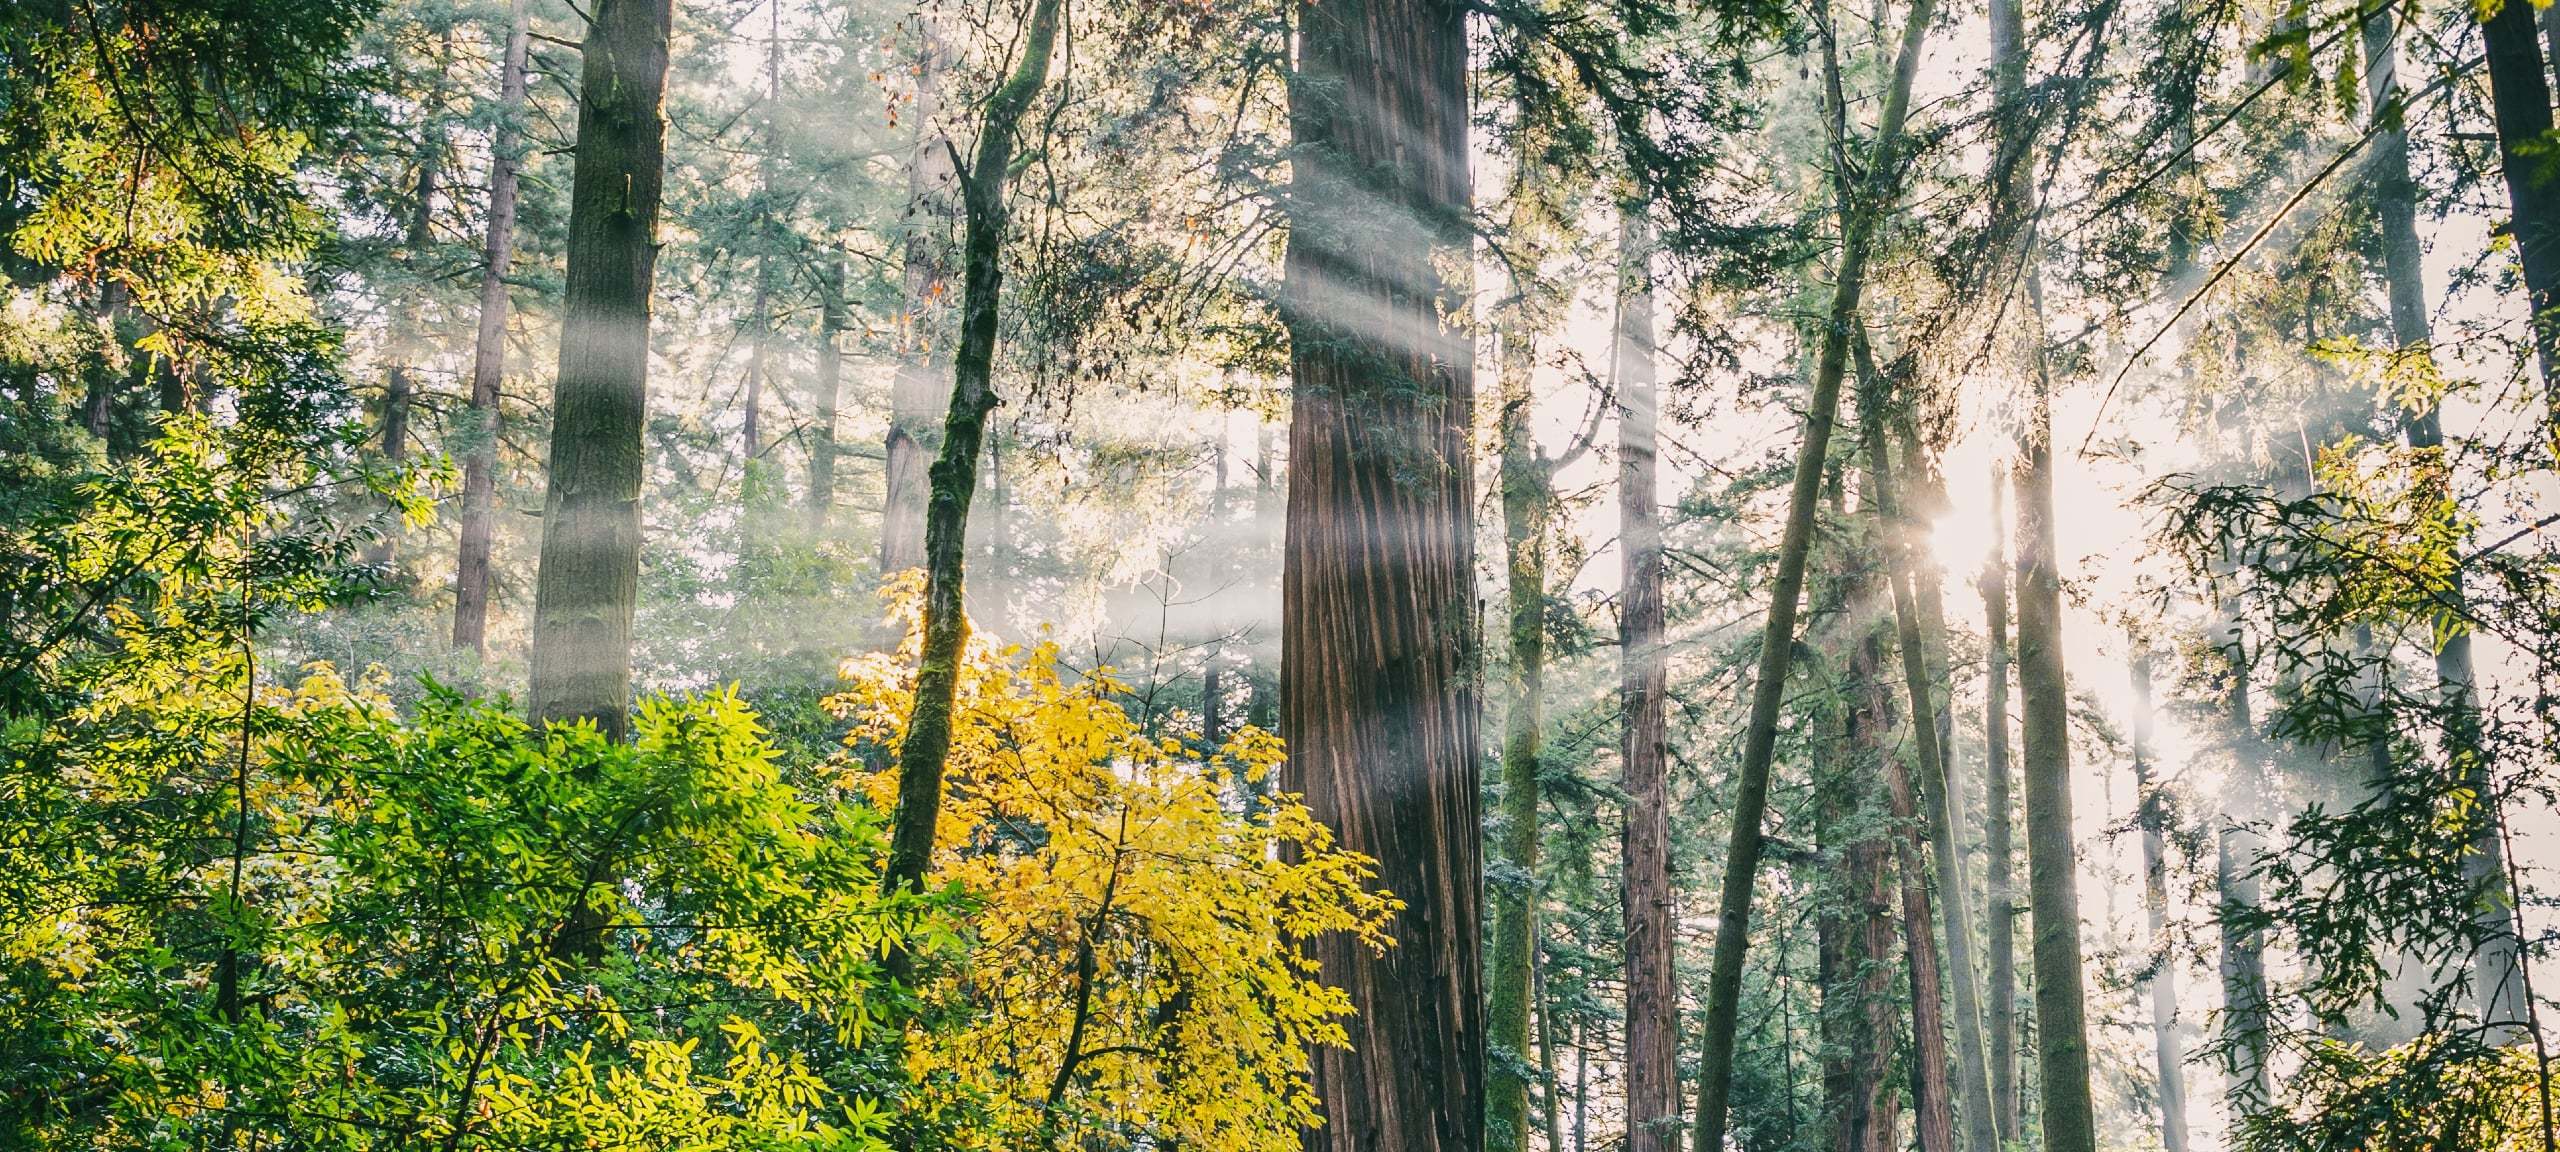 Sunlight breaking through trees at Henry Cowell Redwoods State Park. Photo by Shakti Rajpurohit on Unsplash